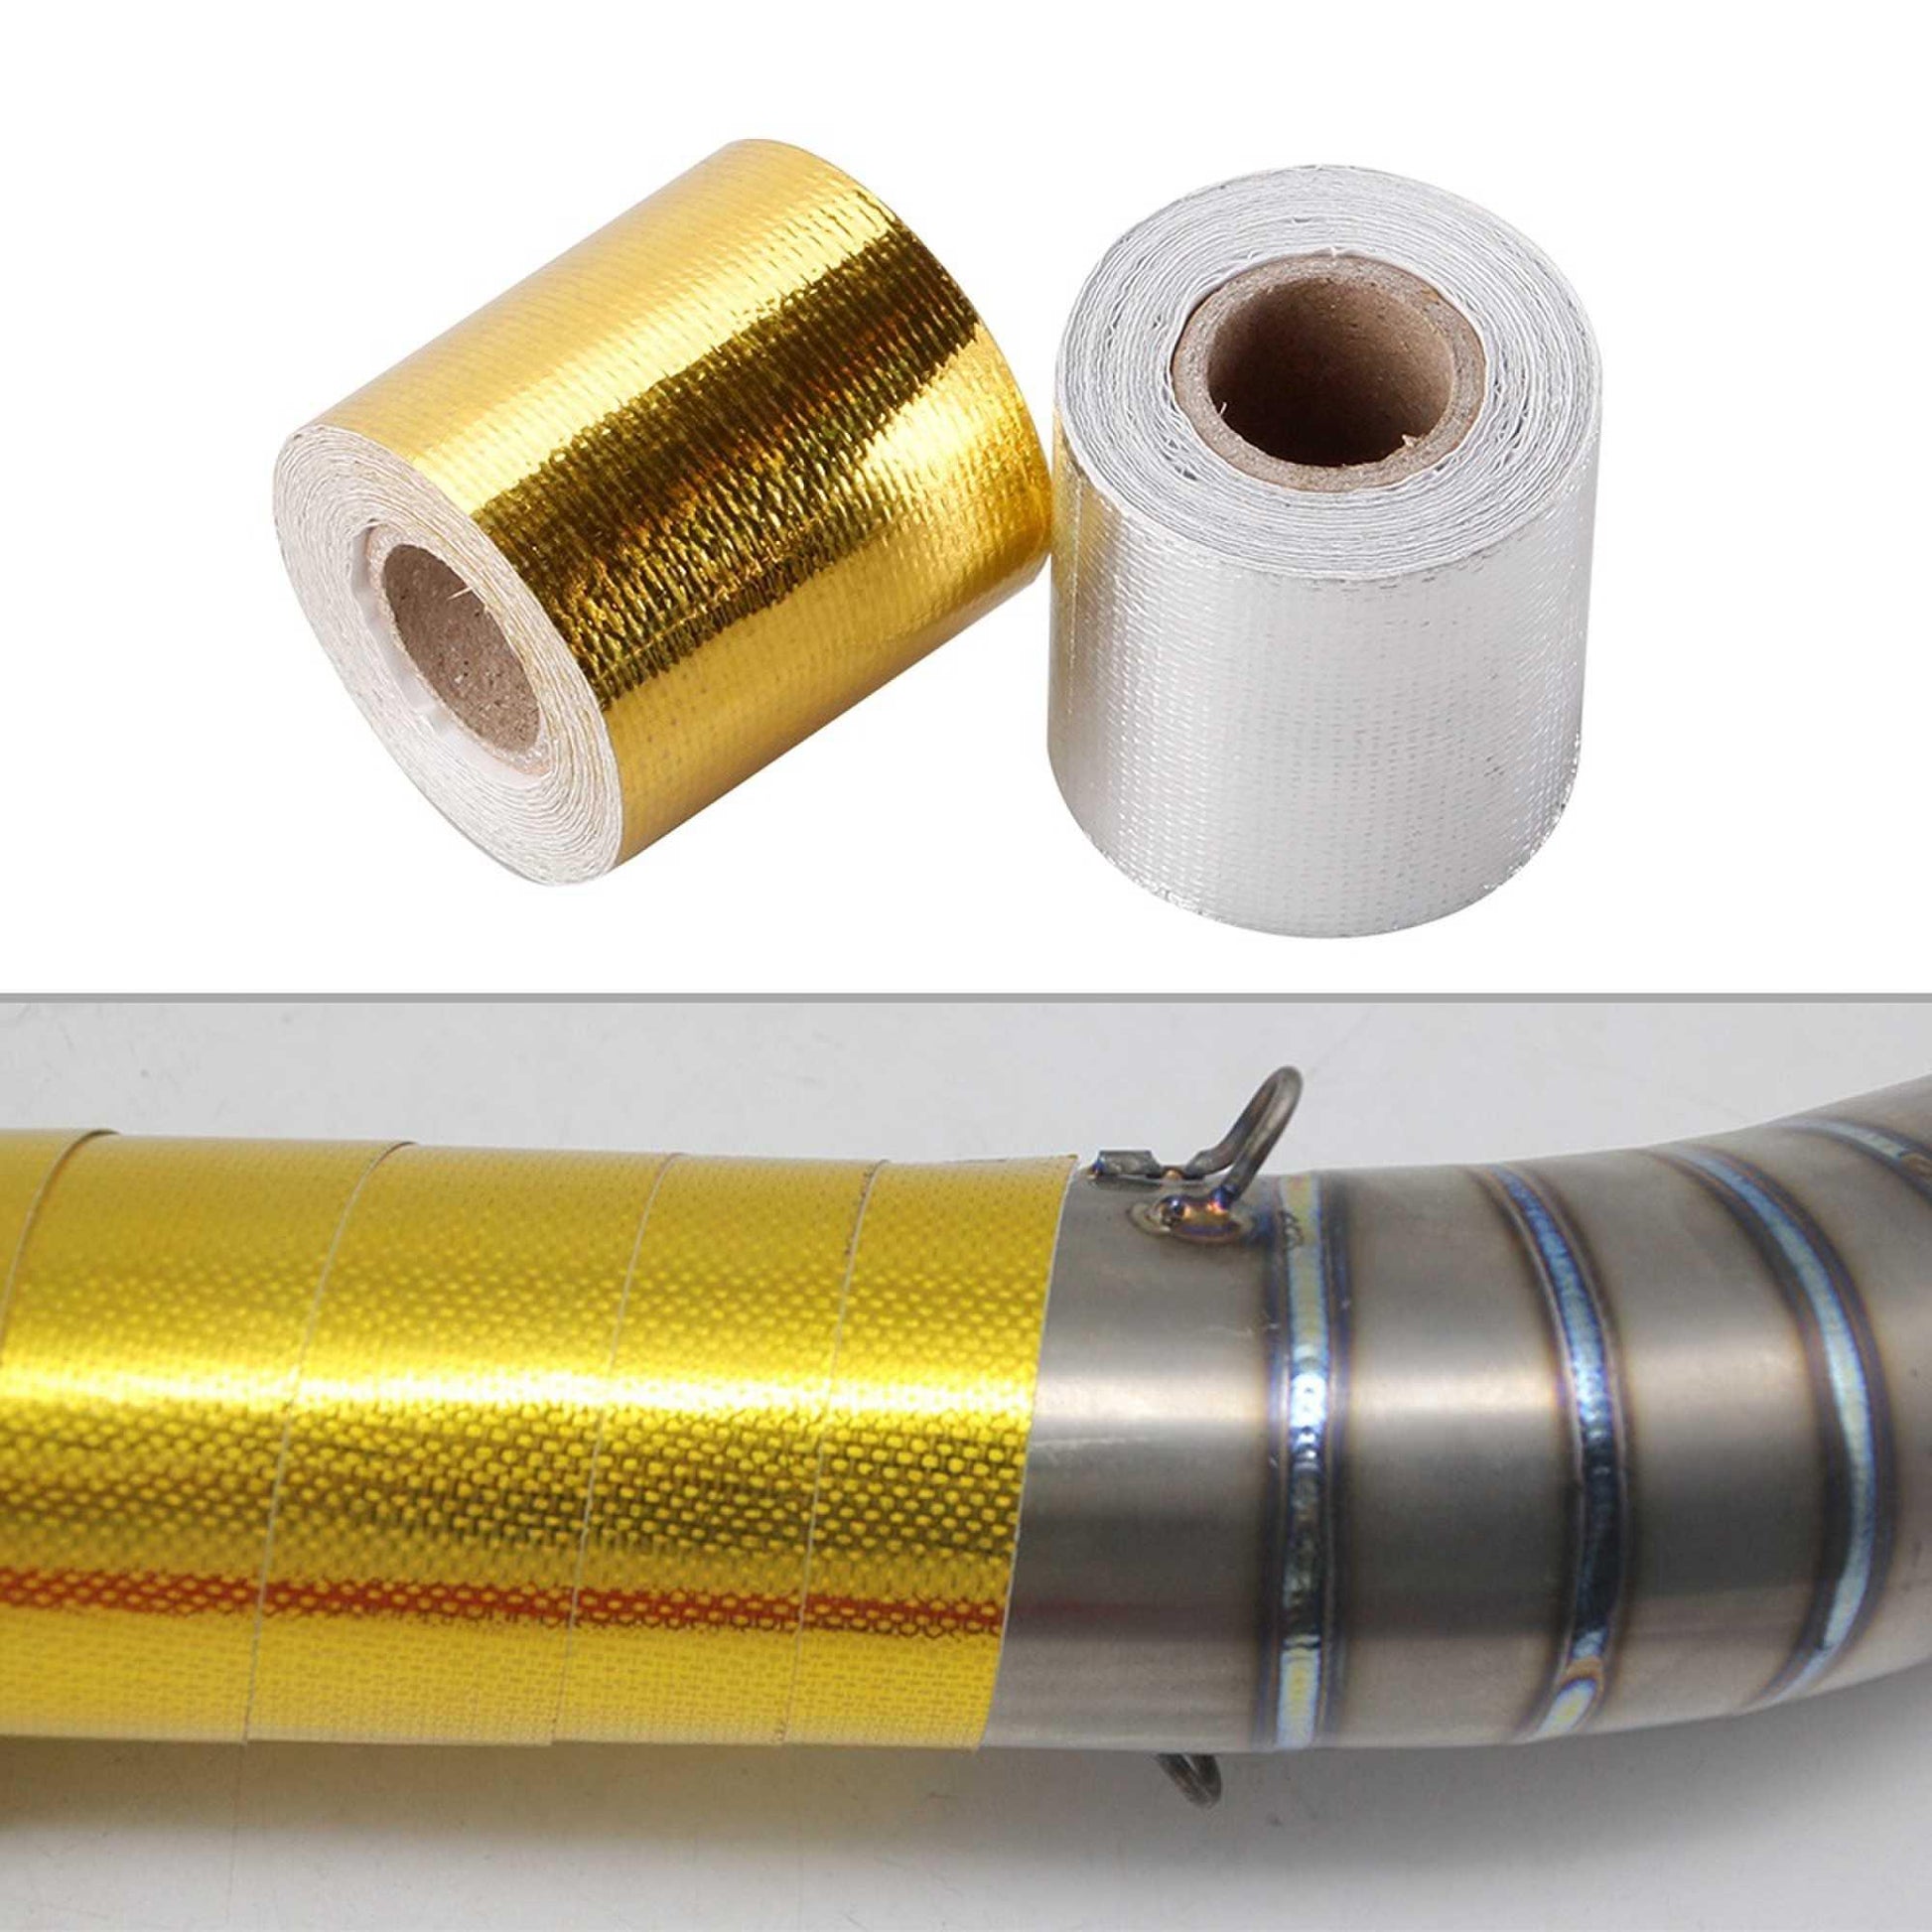 RASTP 2 Inch 5M Thermal Exhaust Tape for Ductwork, Dryer Vent, HVAC - RASTP